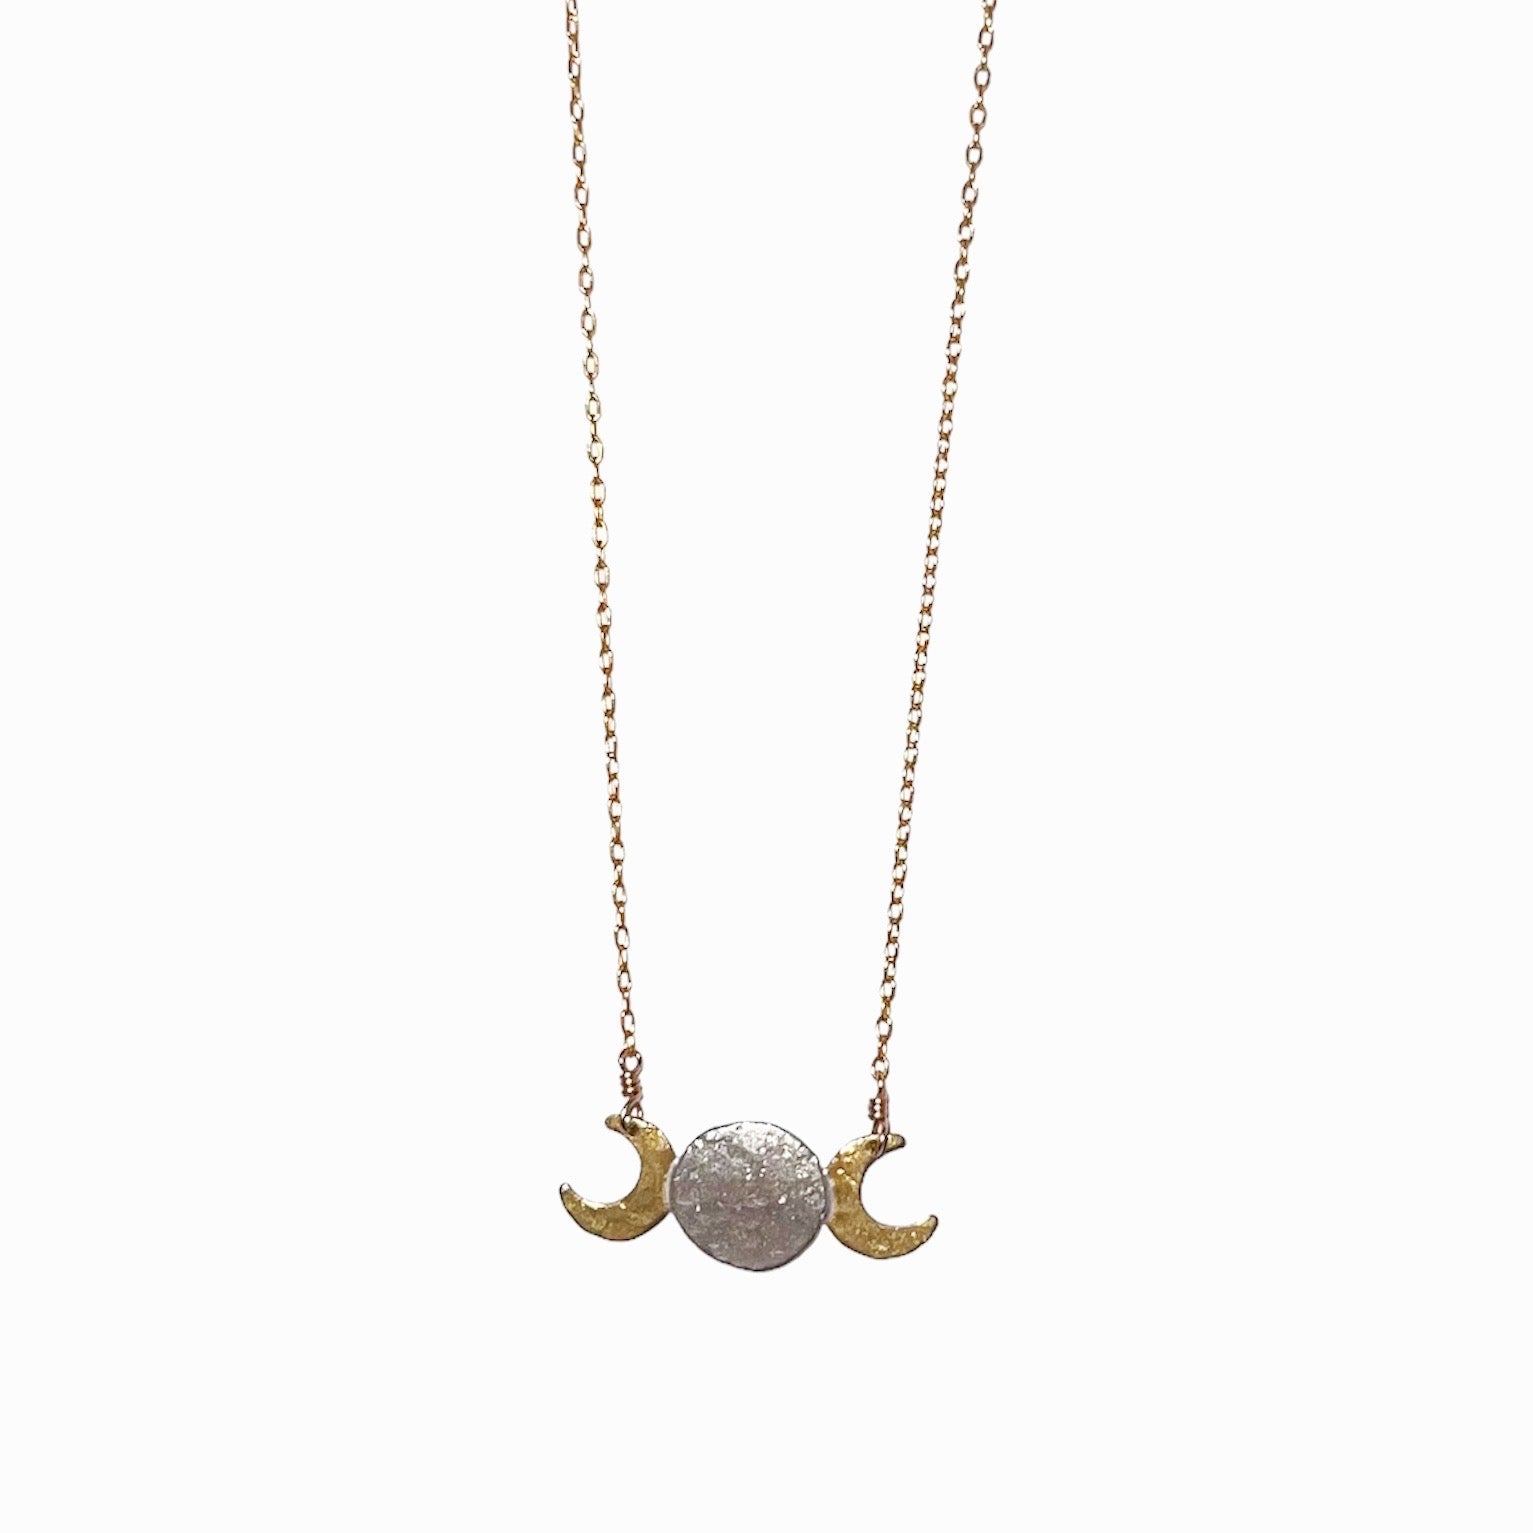 Moon Phase Bronze Necklace - Seed and Sky